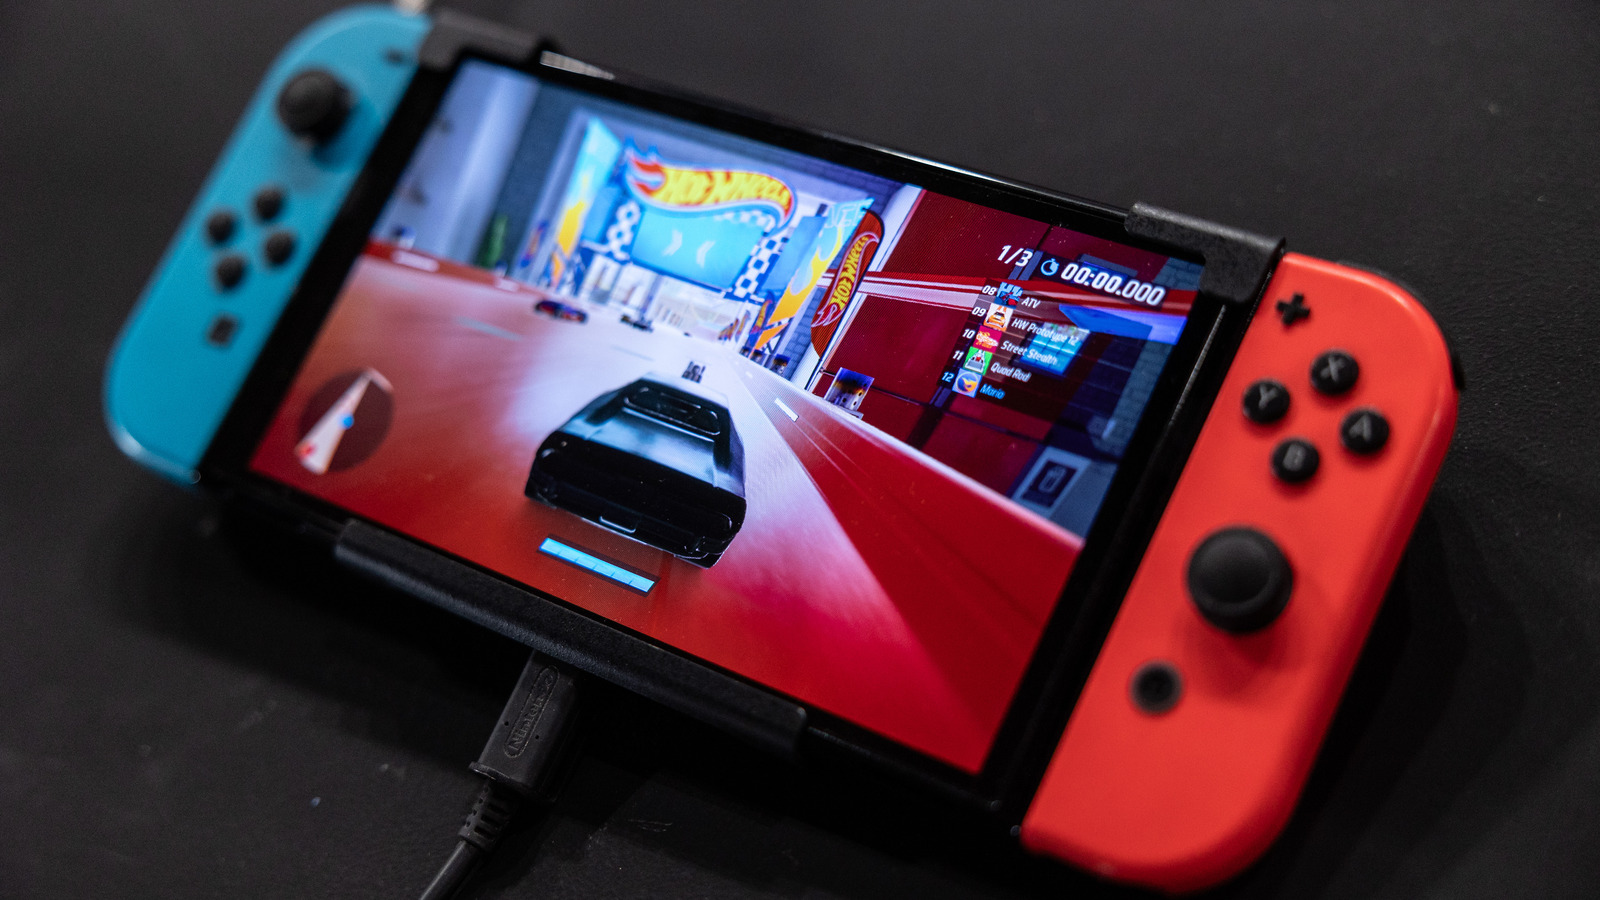 (This YouTuber Turned A Wi-Fi Router Into A Nintendo Switch Emulator) Melbet